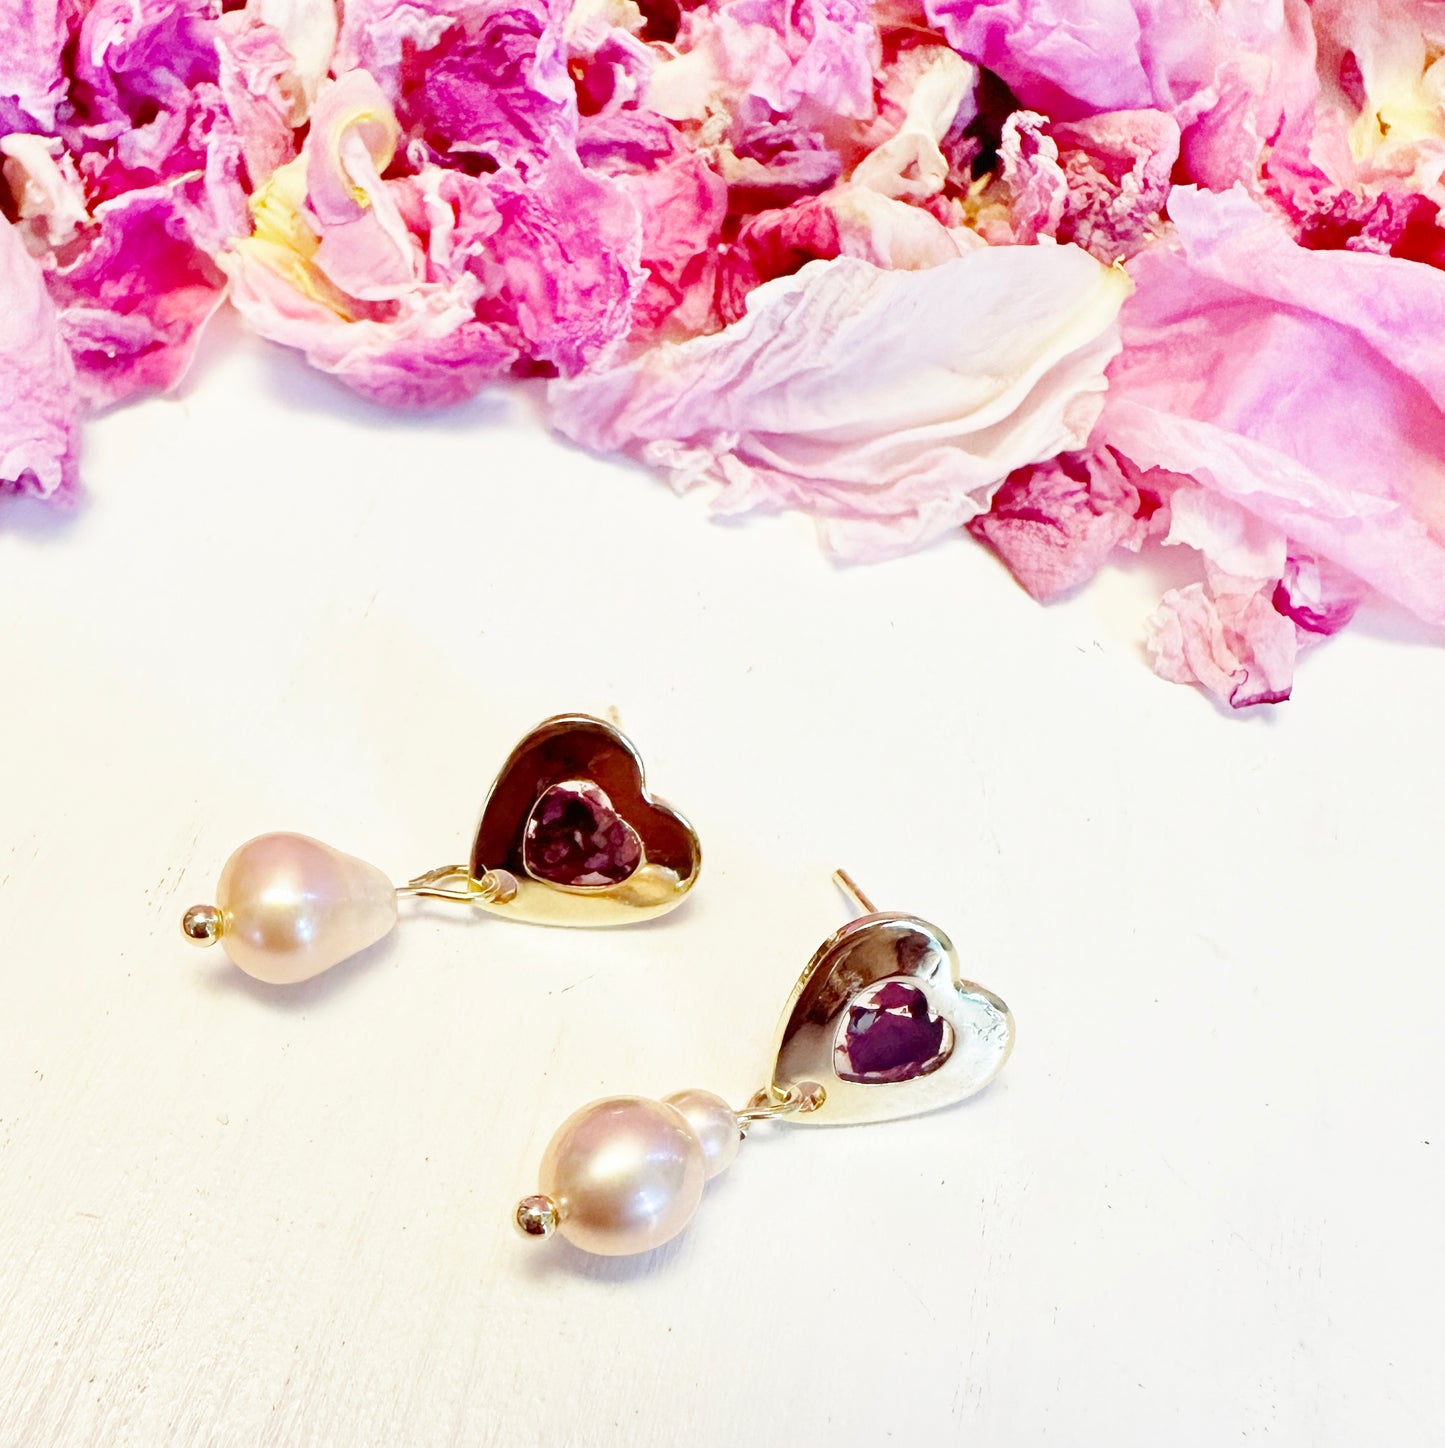 Real flower heart earrings with pearl